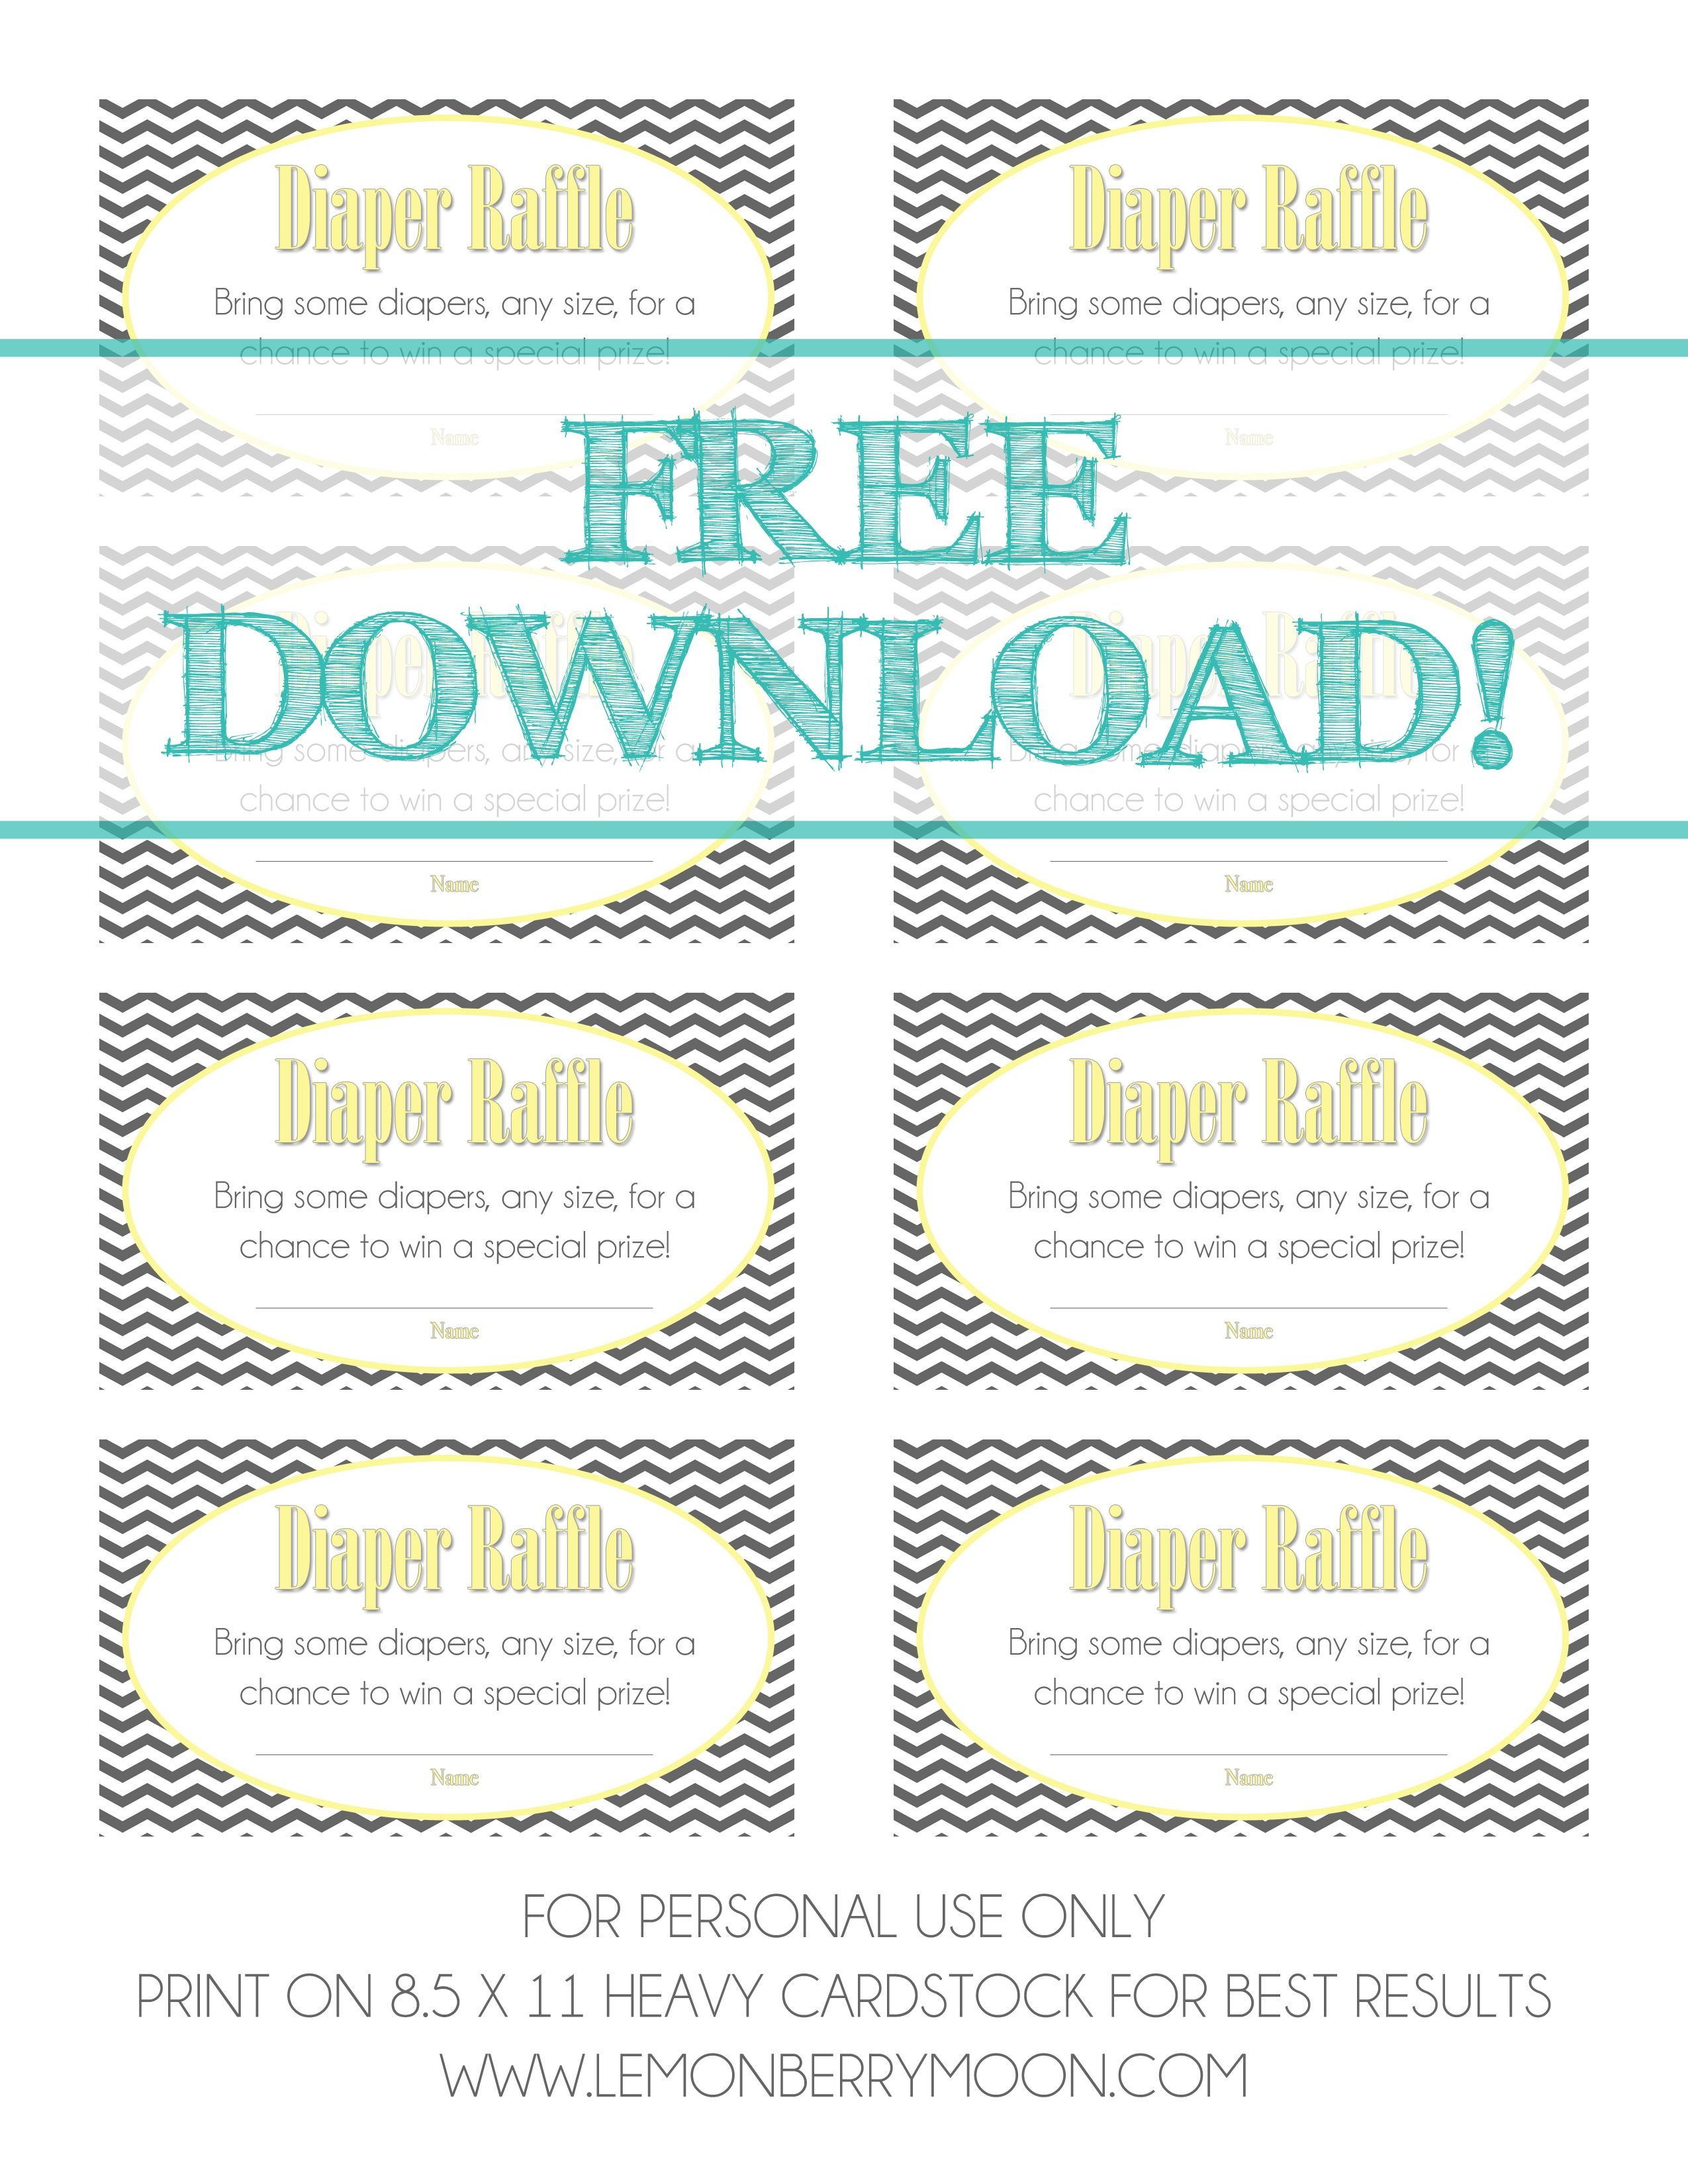 Free Download - Baby Diaper Raffle Template | Baby Boy Shower | Baby - Free Printable Diaper Raffle Tickets For Boy Baby Shower